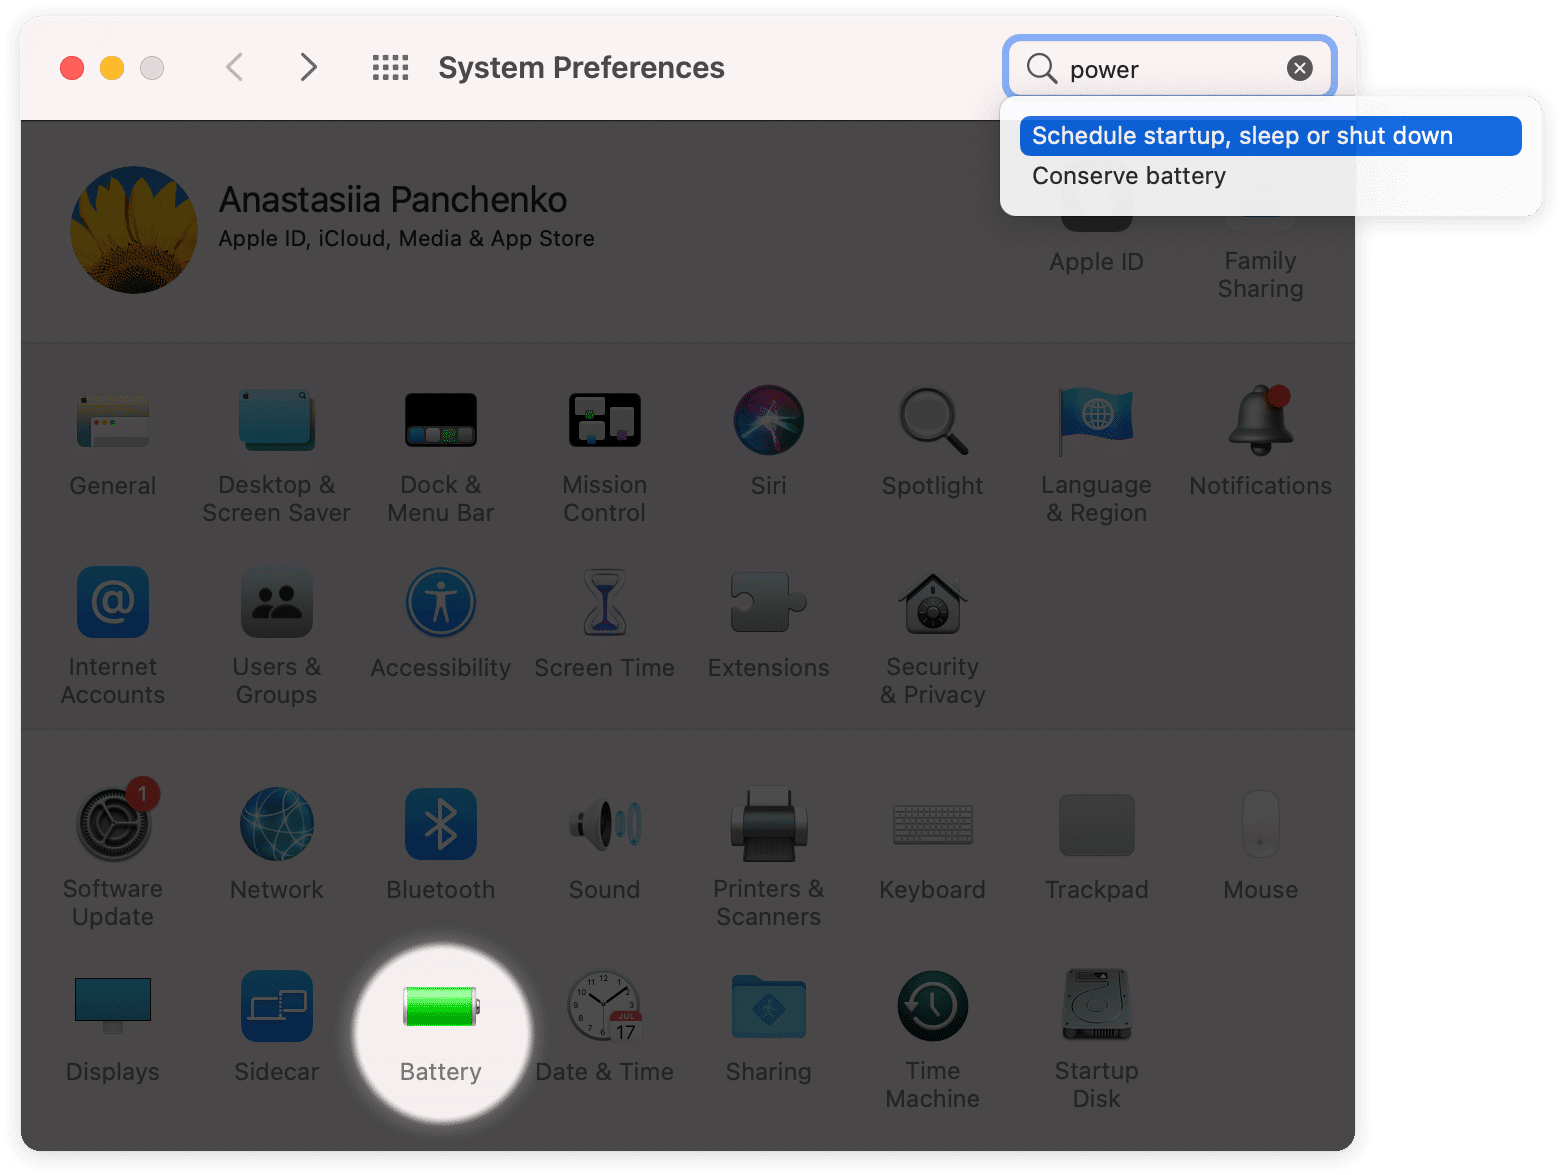 System preferences showing how to find certain settings